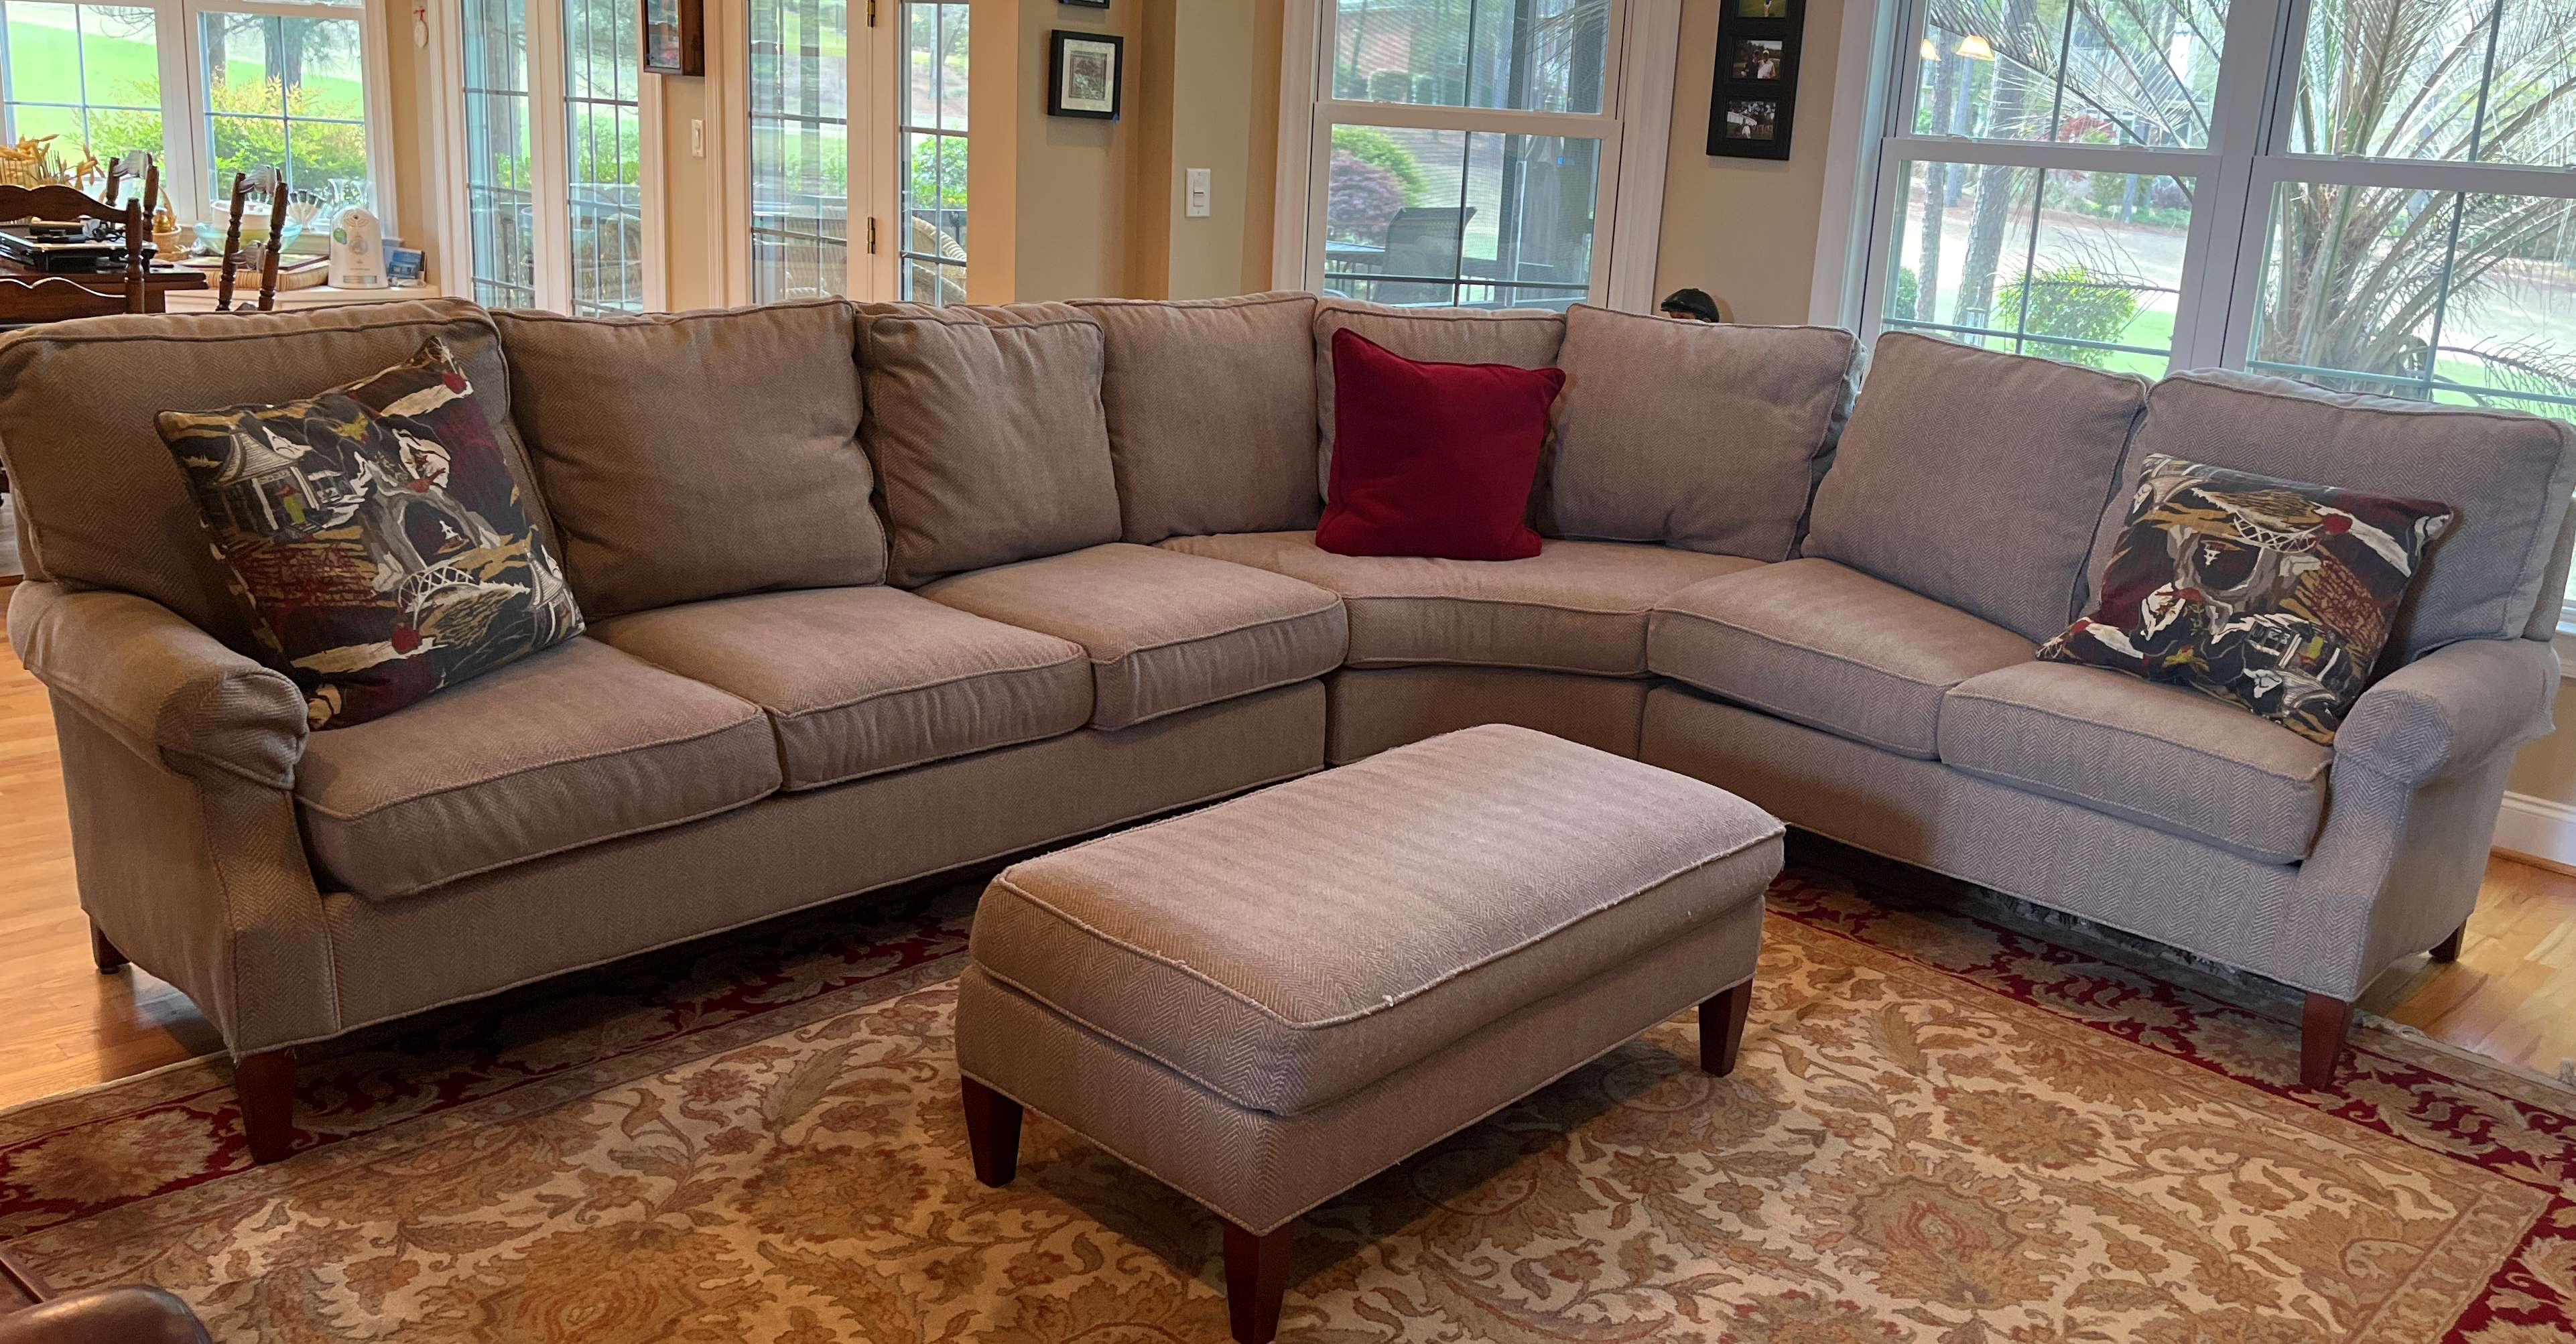 Large Sectional Beige Sofa With Ottoman